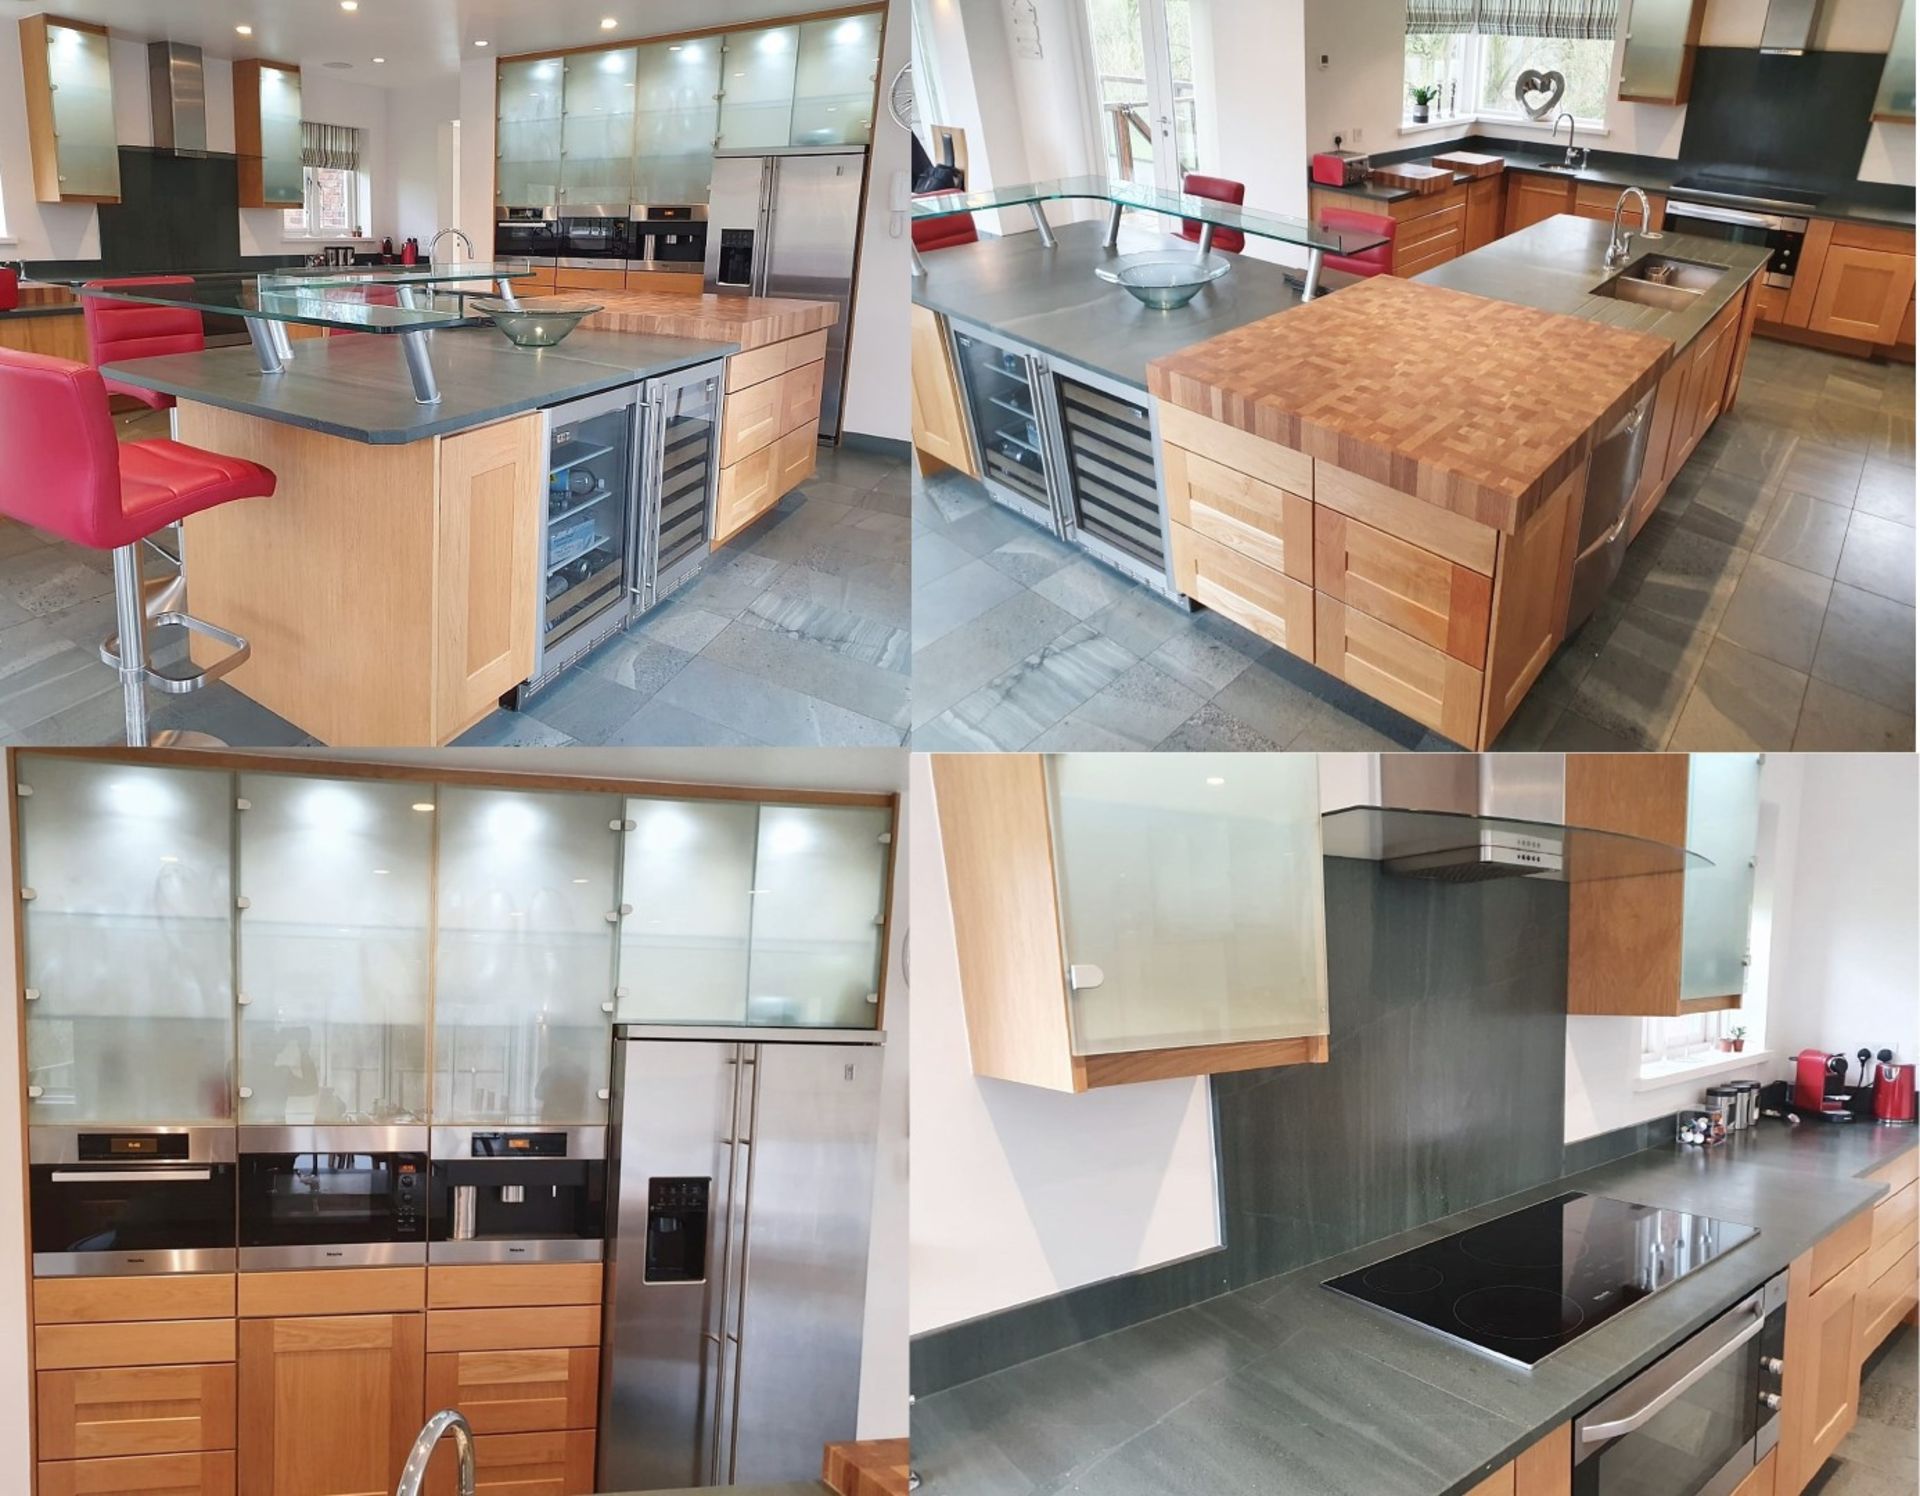 1 x Solid Oak Fitted Kitchen With Intergrated Miele Appliancess - CL487 - Location: Wigan *NO VAT*